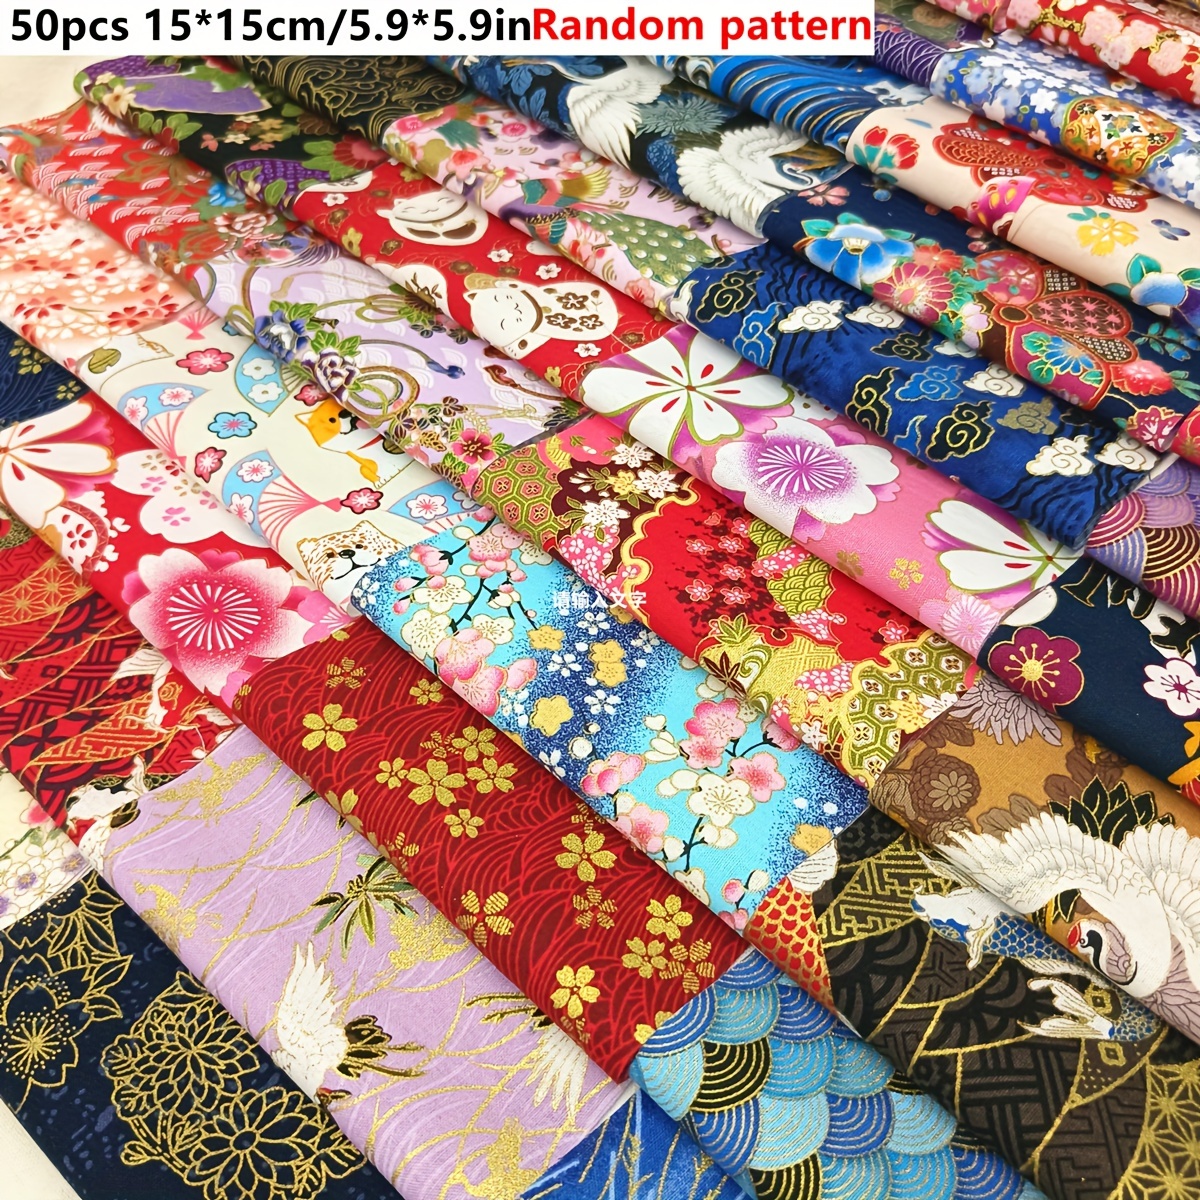 

50pcs Japanese Style Gold-stamped Fabric Squares, 5.9x5.9in, Cartoon Pattern, Cotton Polyester Blend, Machine Washable, Pre-cut For Sewing And Diy Crafts